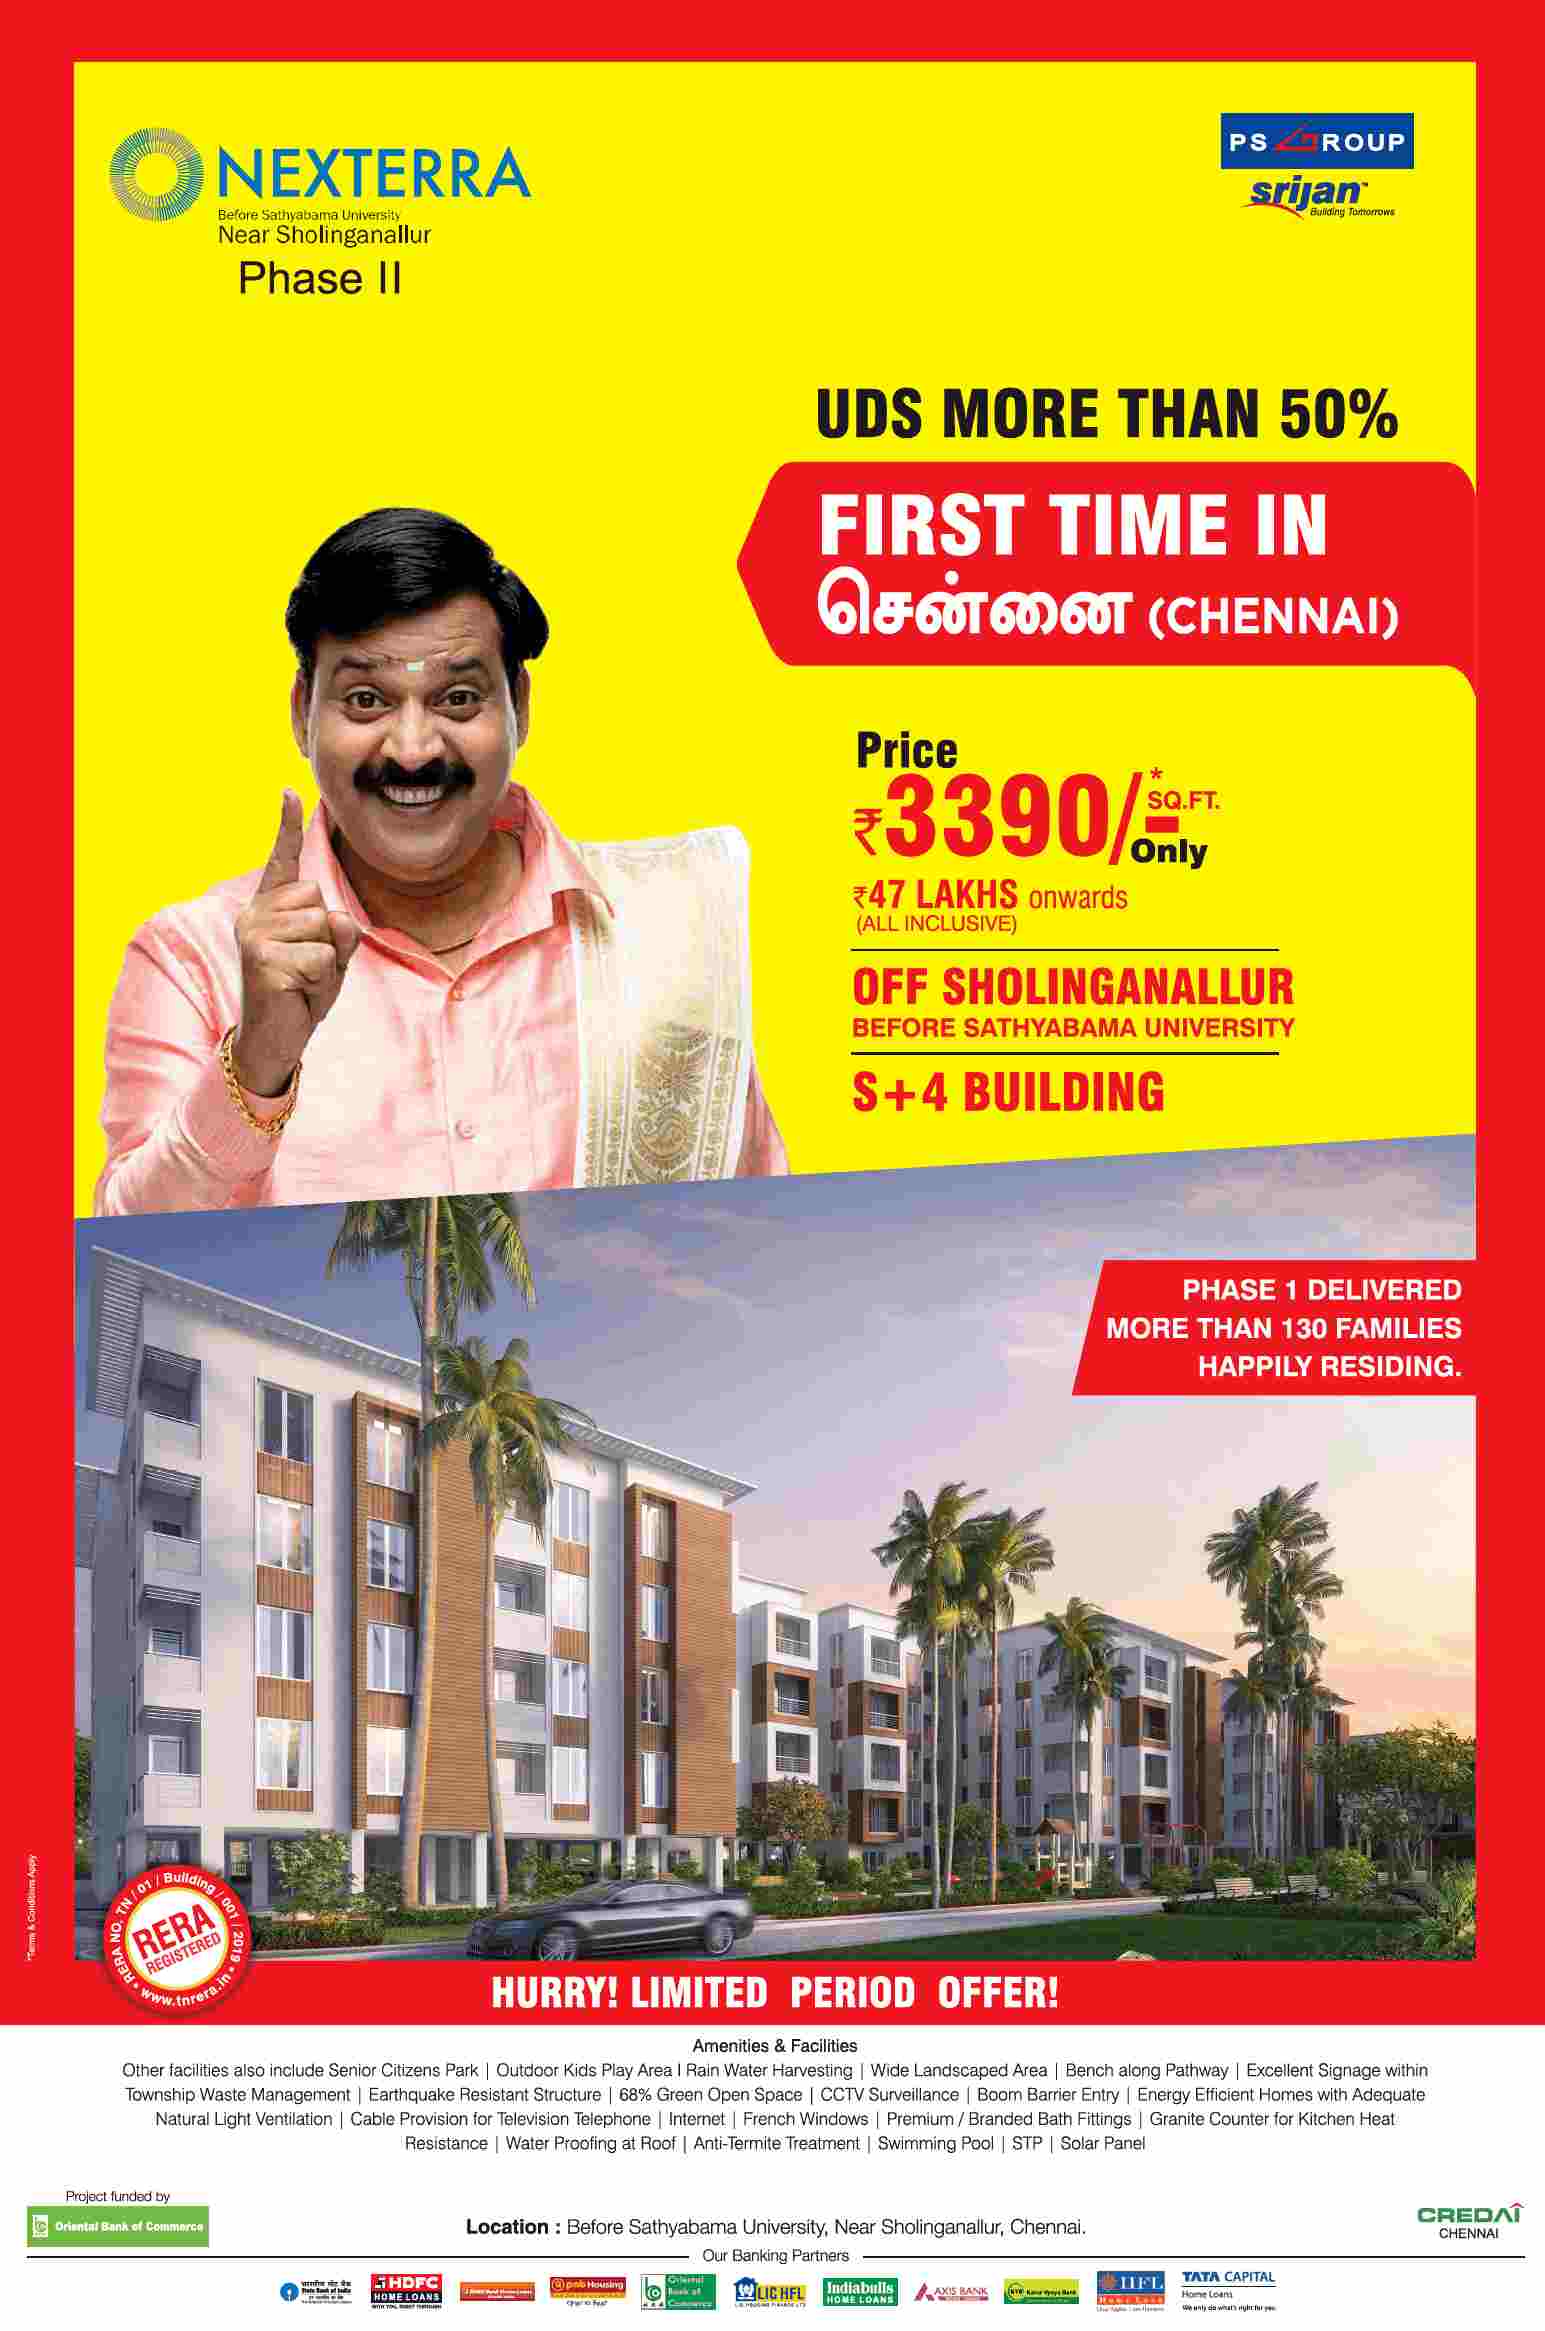 Pay Rs 3390 per sqft to book your abode at PS Srijan Nexterra in Chennai